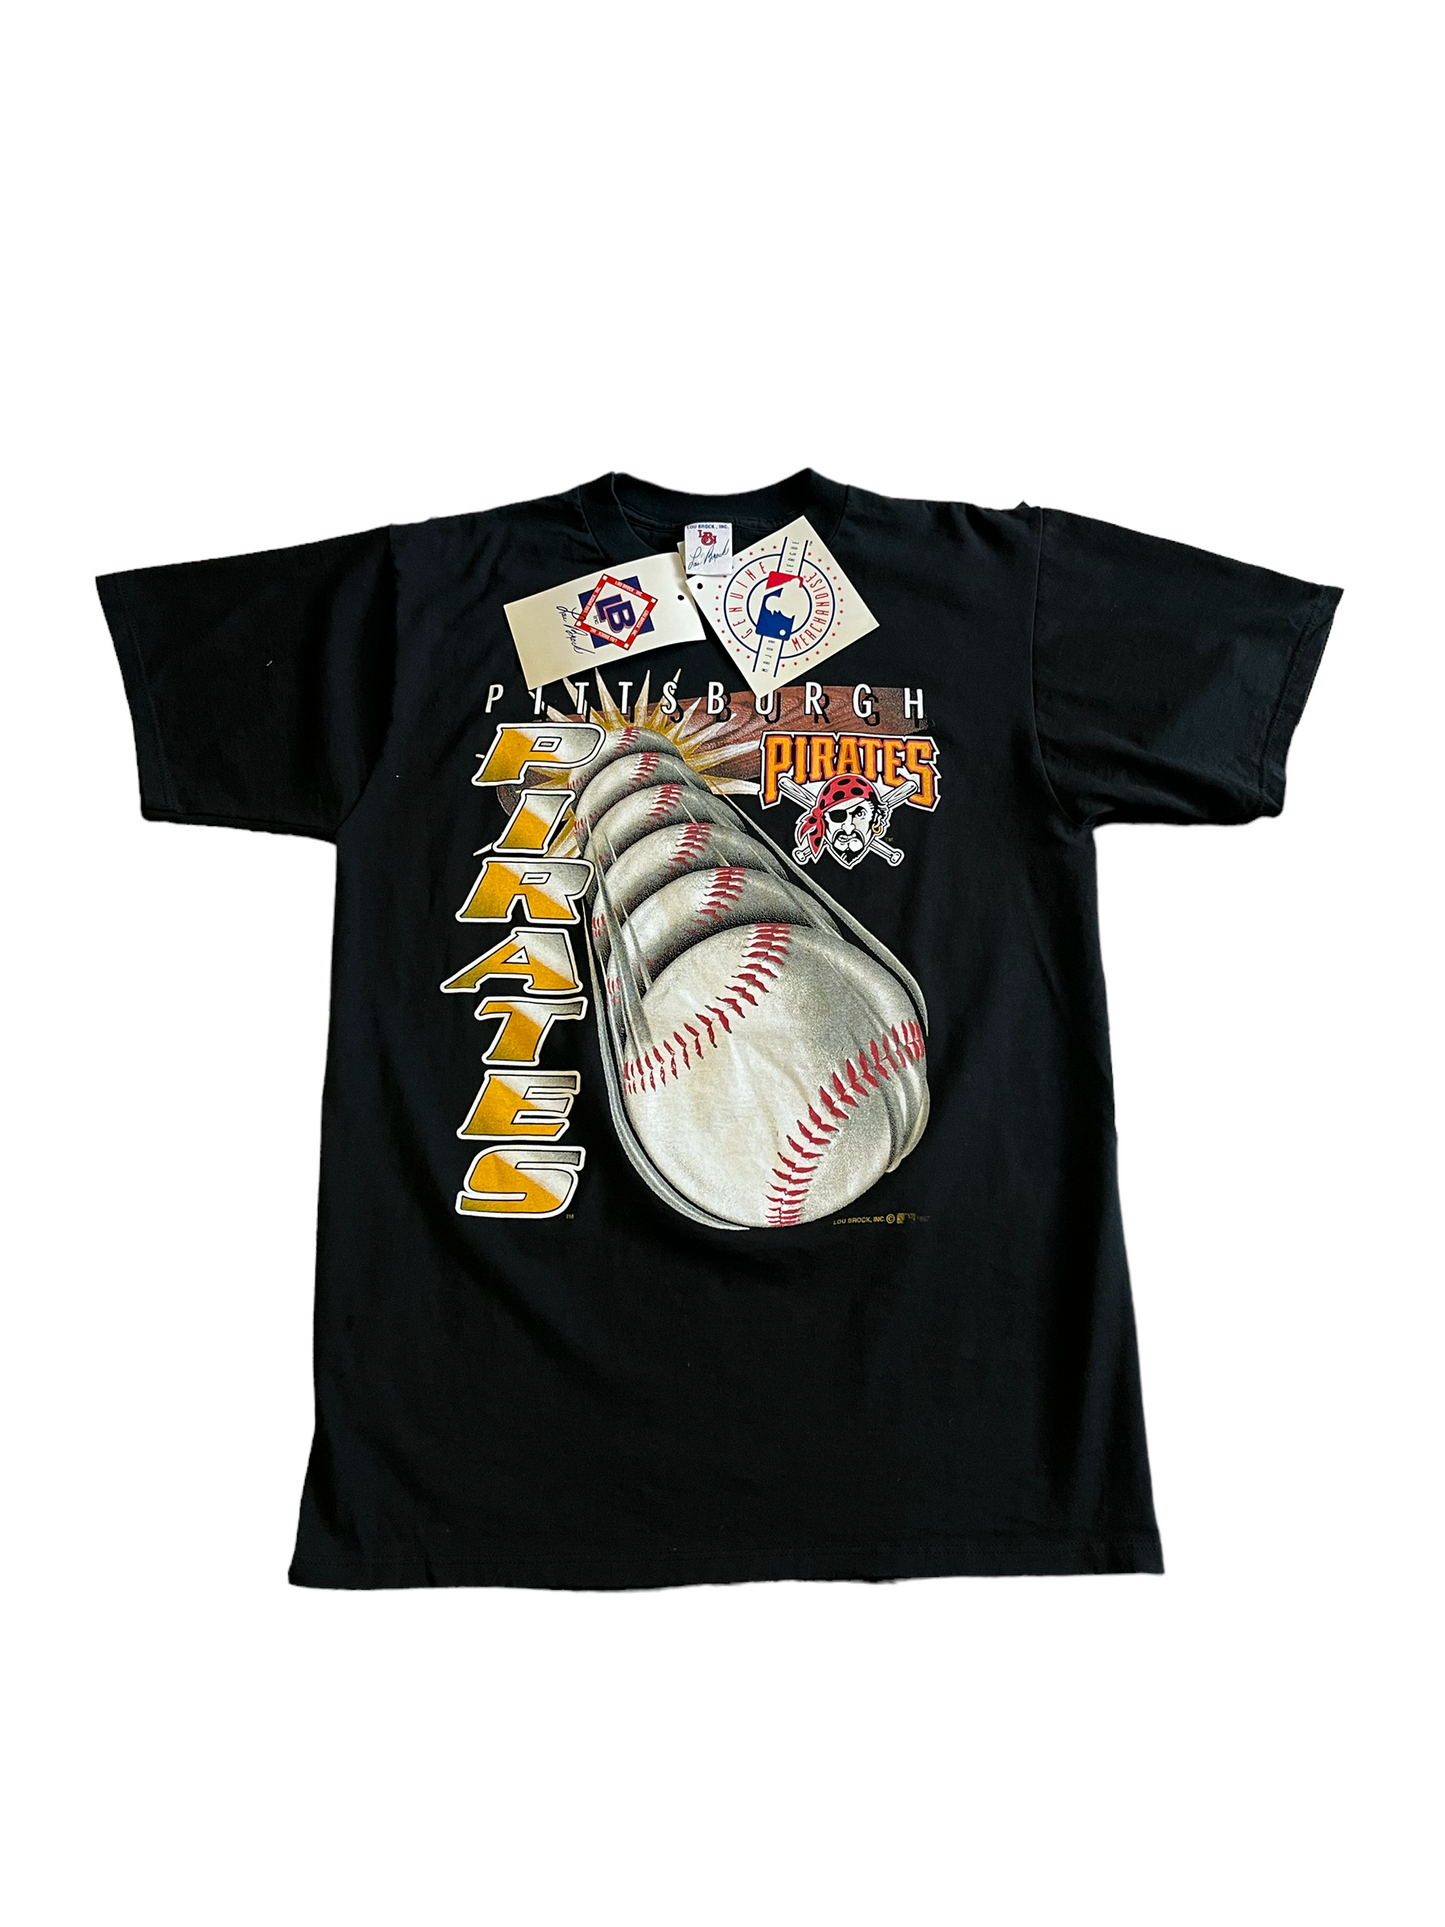 1997 NEW Pittsburgh Pirates Graphic Tee (with tags)